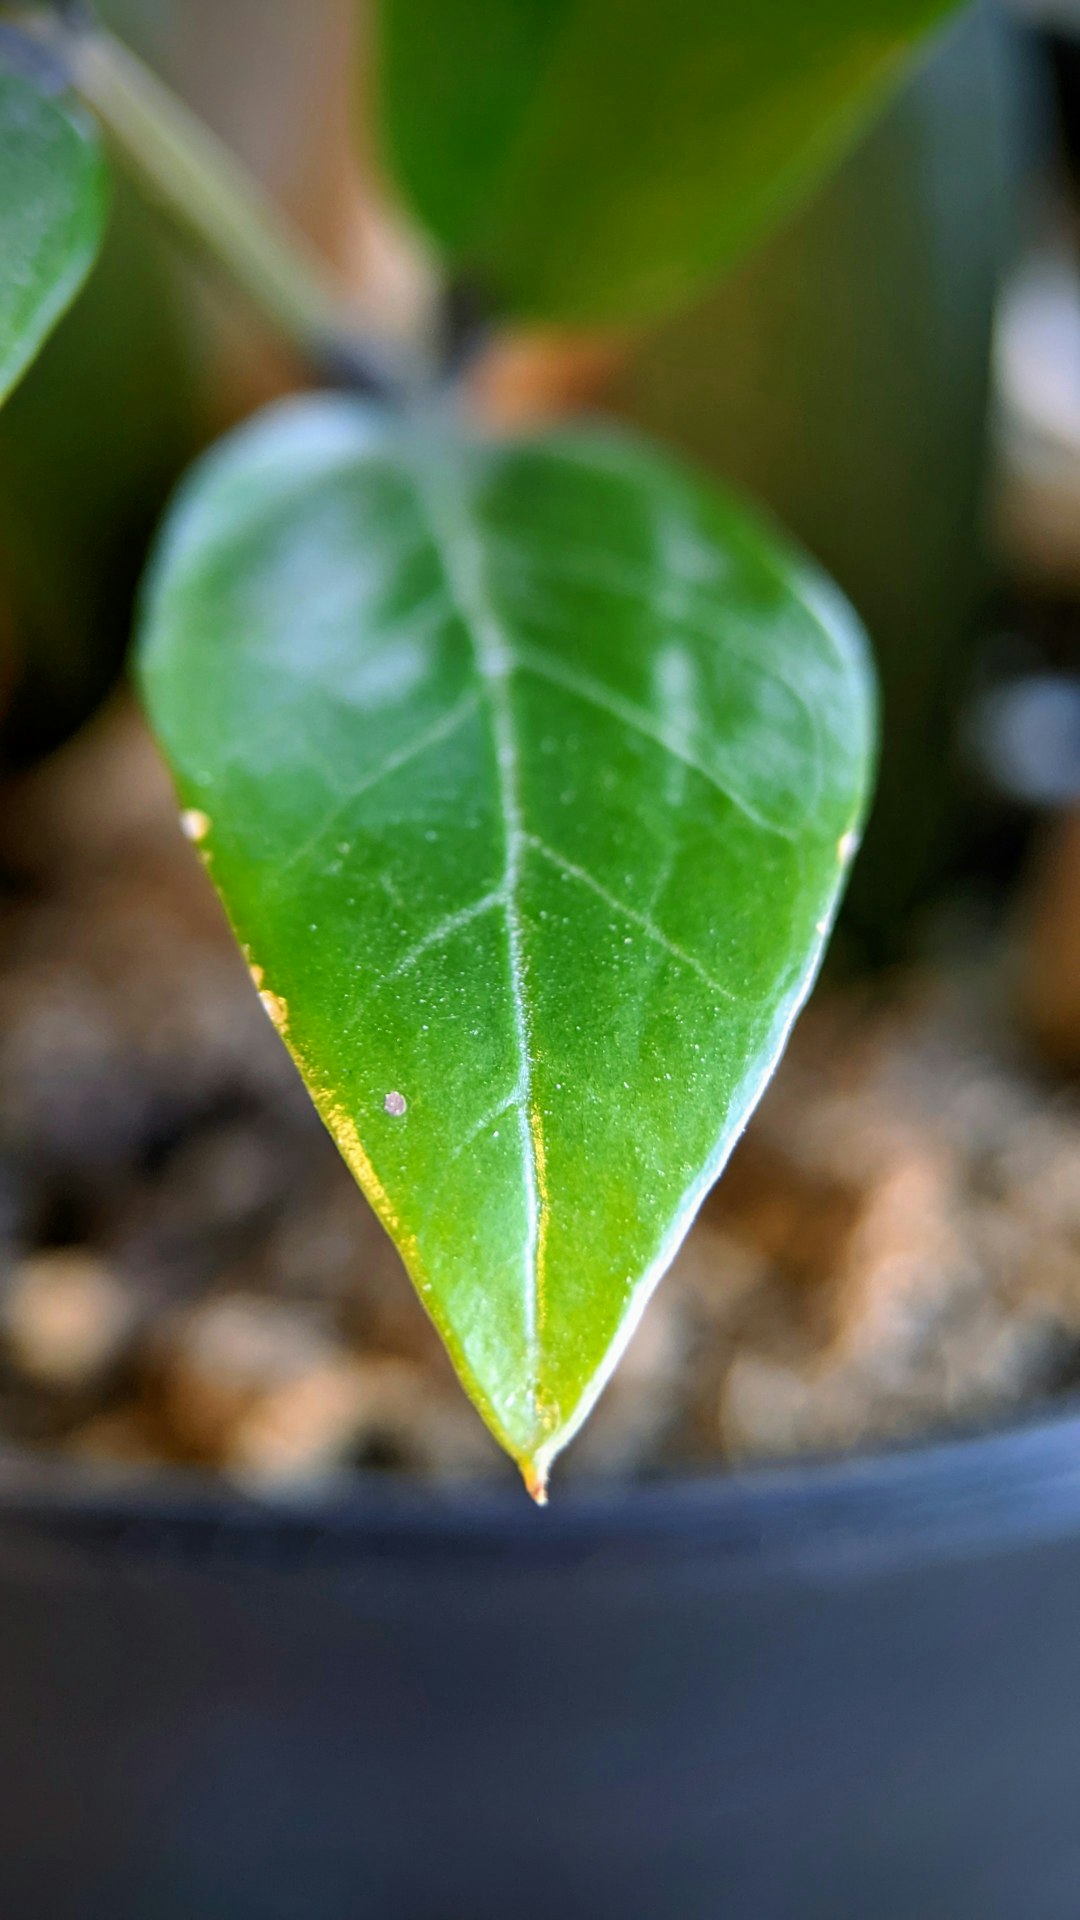 madrono, Planting soil, a close up of a green leaf on a plant